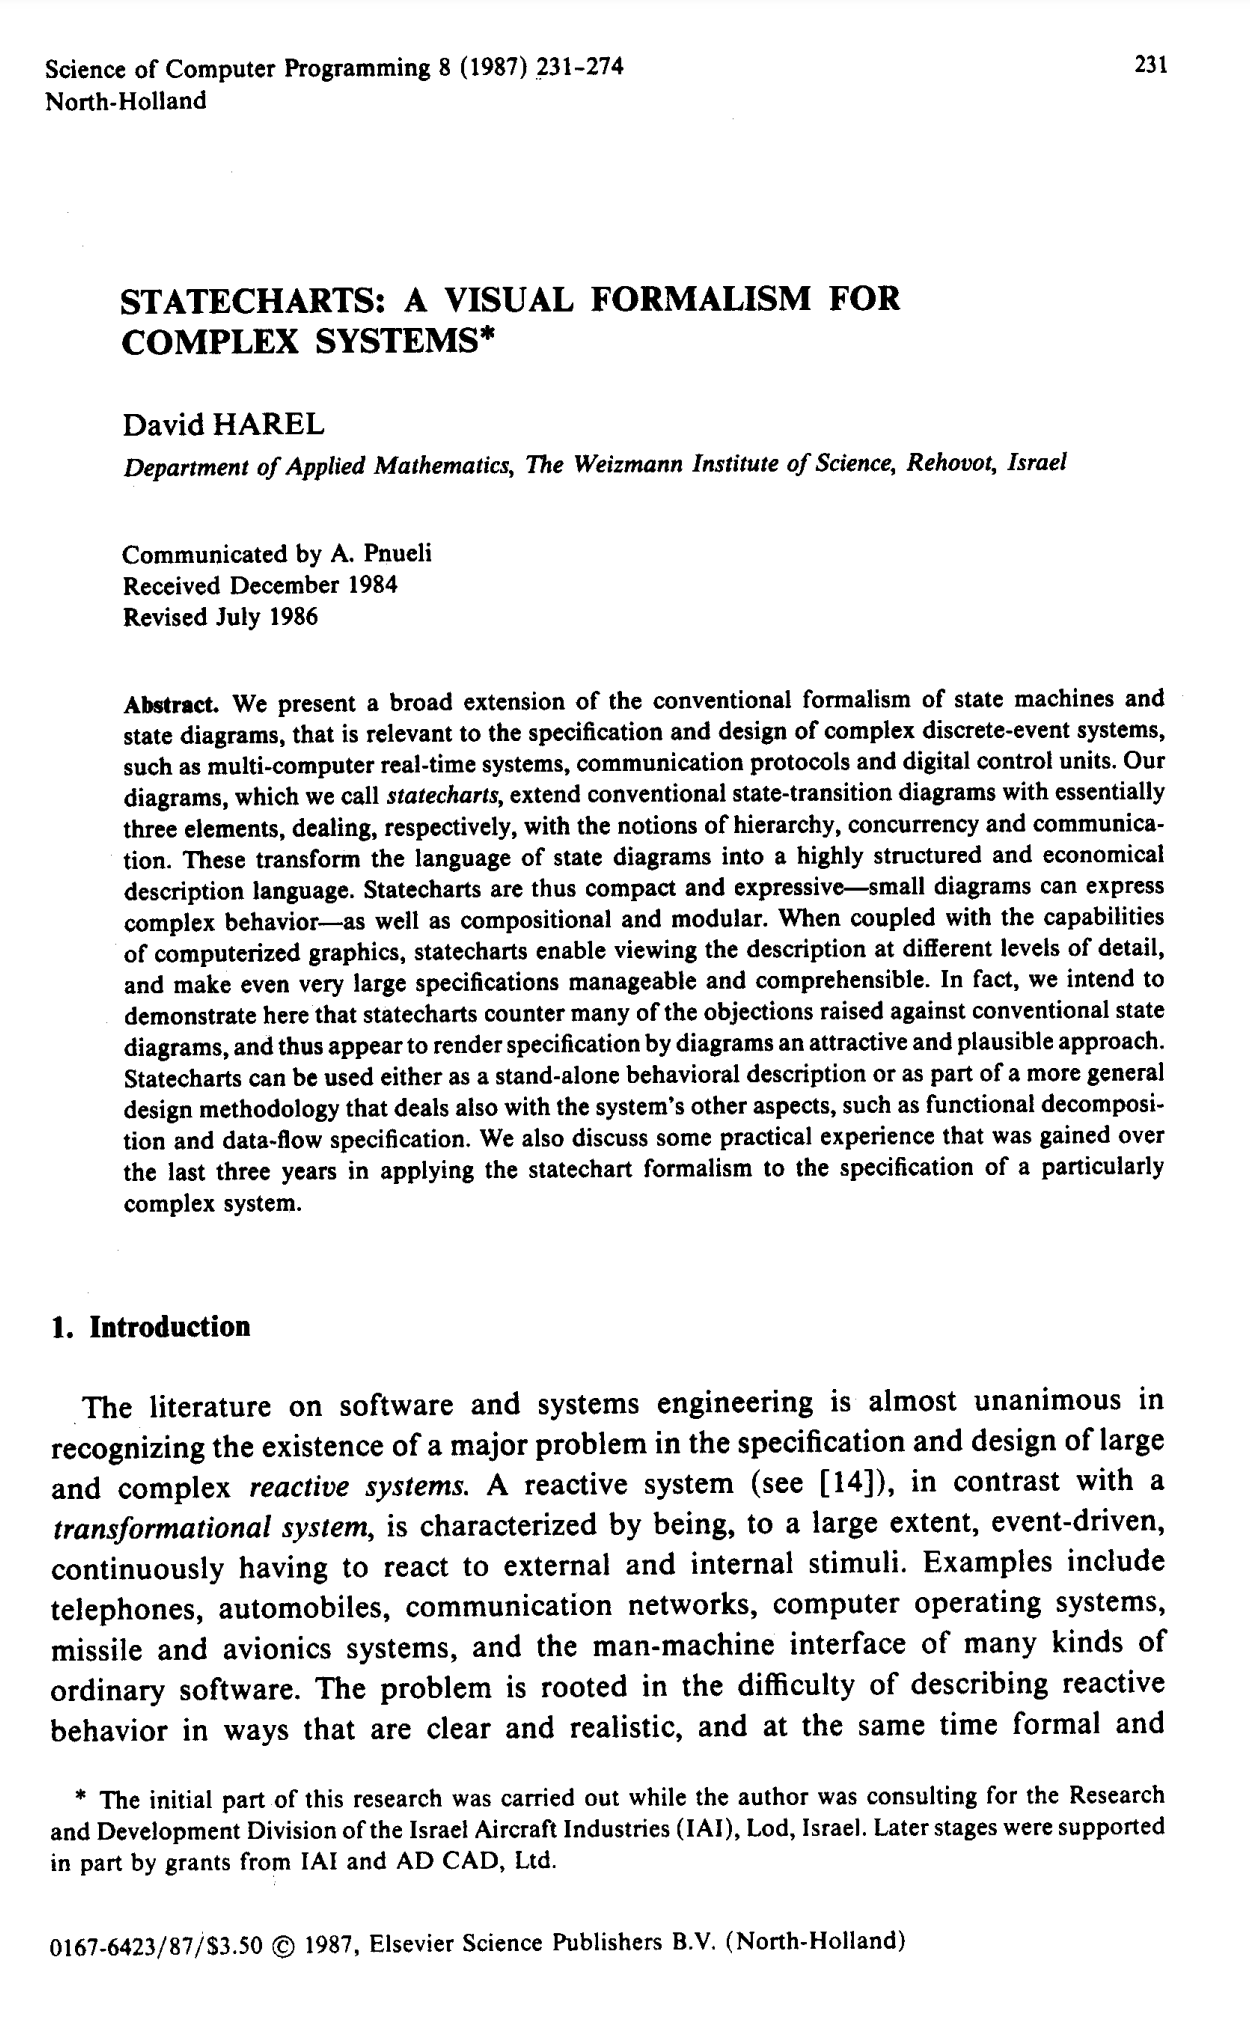 The first page of David Harel's statechart paper